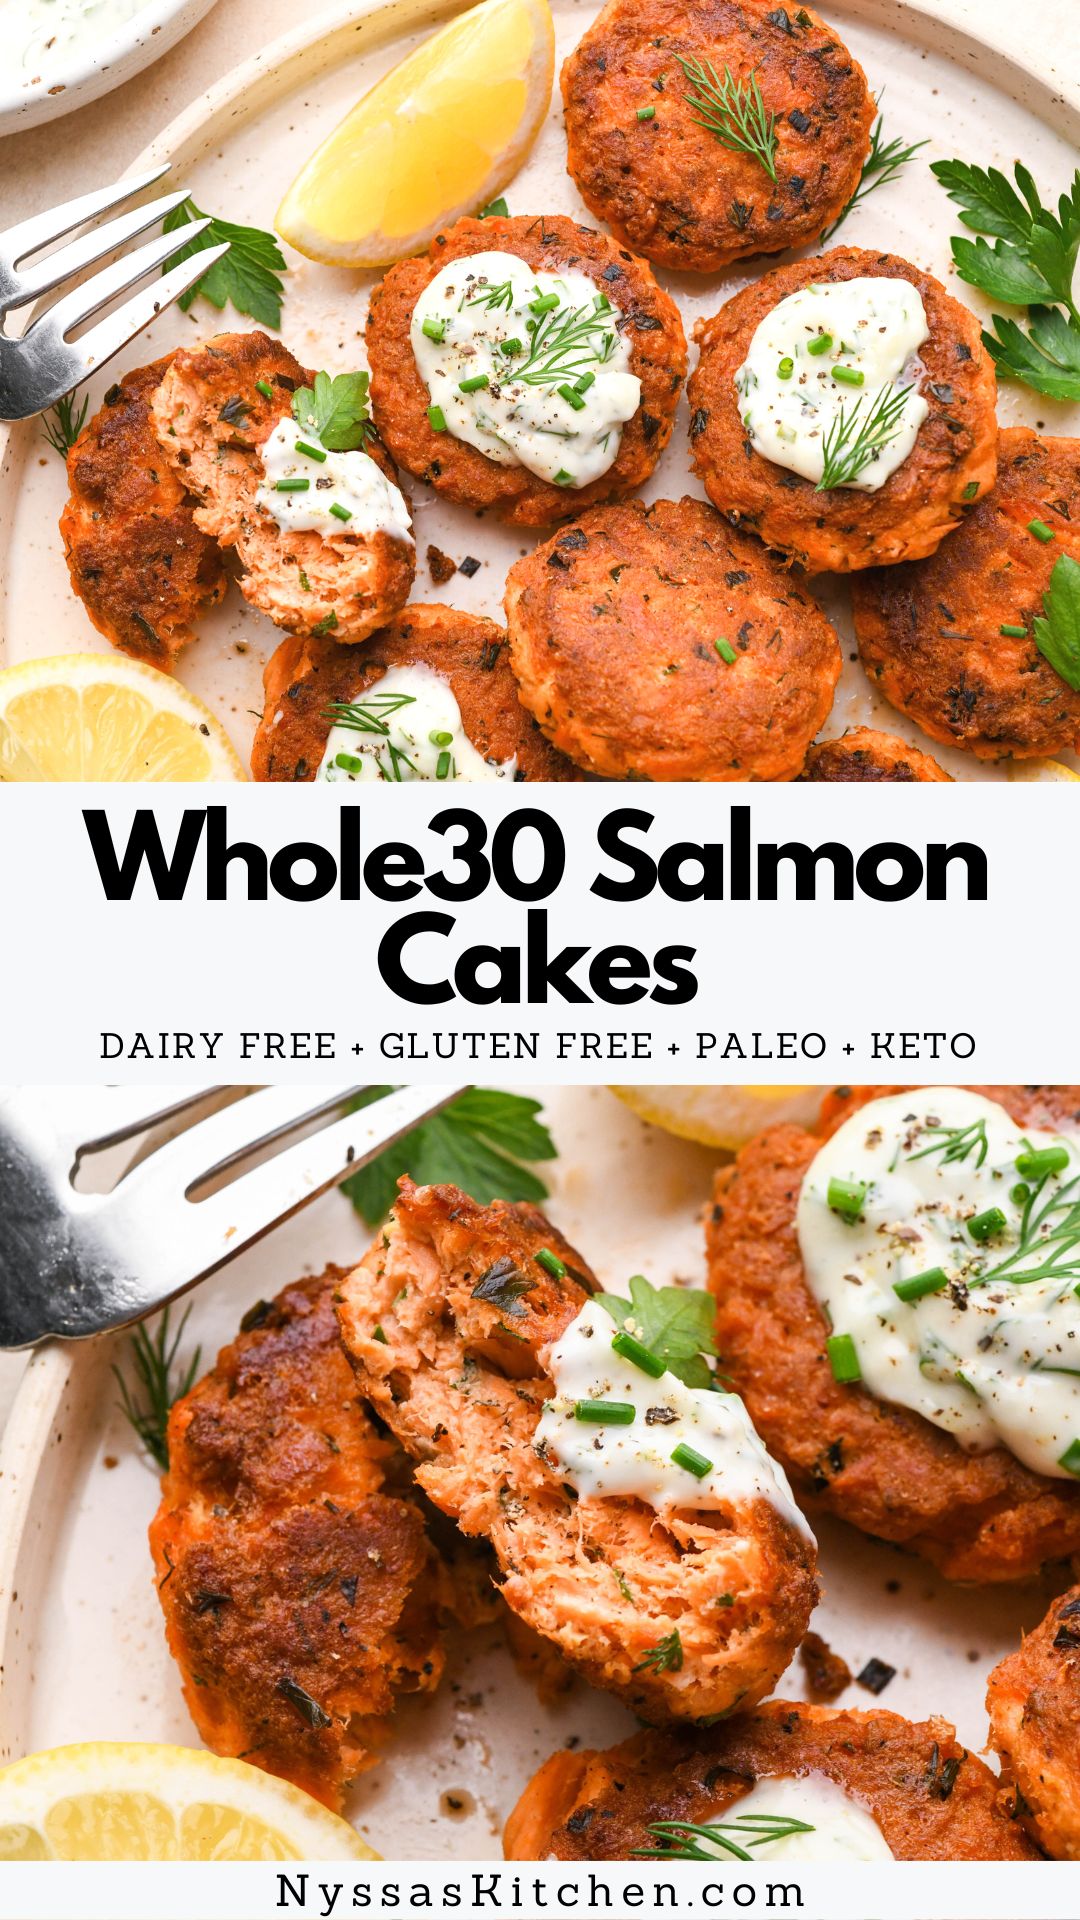 These Whole30 salmon cakes (salmon patties) are a delicious, protein rich recipe made with fresh salmon, herbs, and without breadcrumbs, panko, or flour. Easy enough to make on a weeknight but impressive enough to make for a dinner party! Crispy, loaded with flavor and nutrient dense. Whole30, paleo, gluten free, dairy free, low carb, and keto friendly.